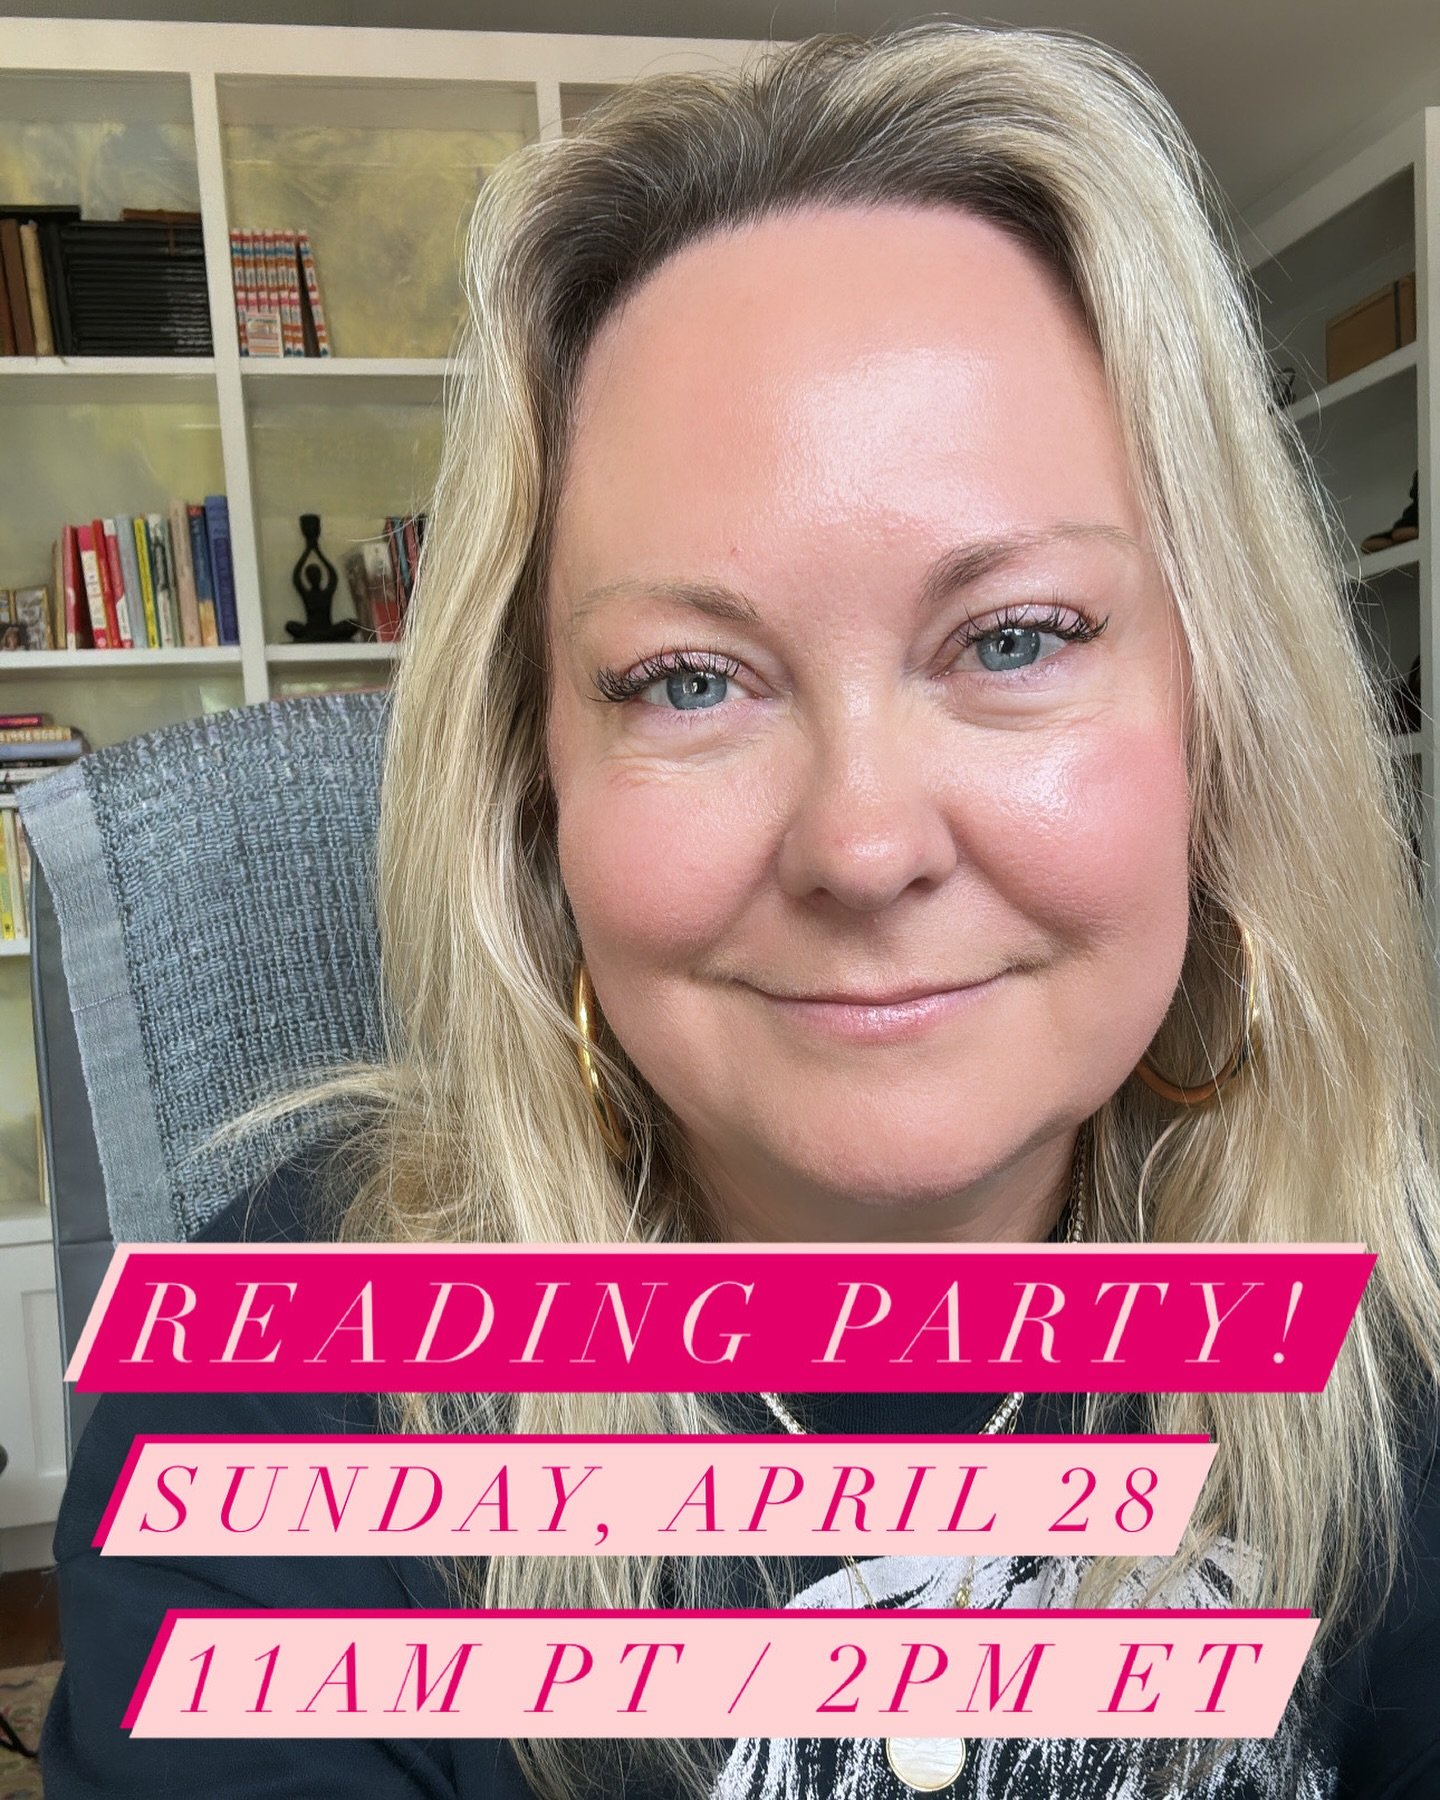 It&rsquo;s time for a READING PARTY! 🎉 (keep reading if you don&rsquo;t know what a Reading Party is)

Sunday, April 28
11am PT / 12pm MT / 1pm CT / 2pm ET

We&rsquo;ll gather here on IG where I will go LIVE and we&rsquo;ll greet one another, share 